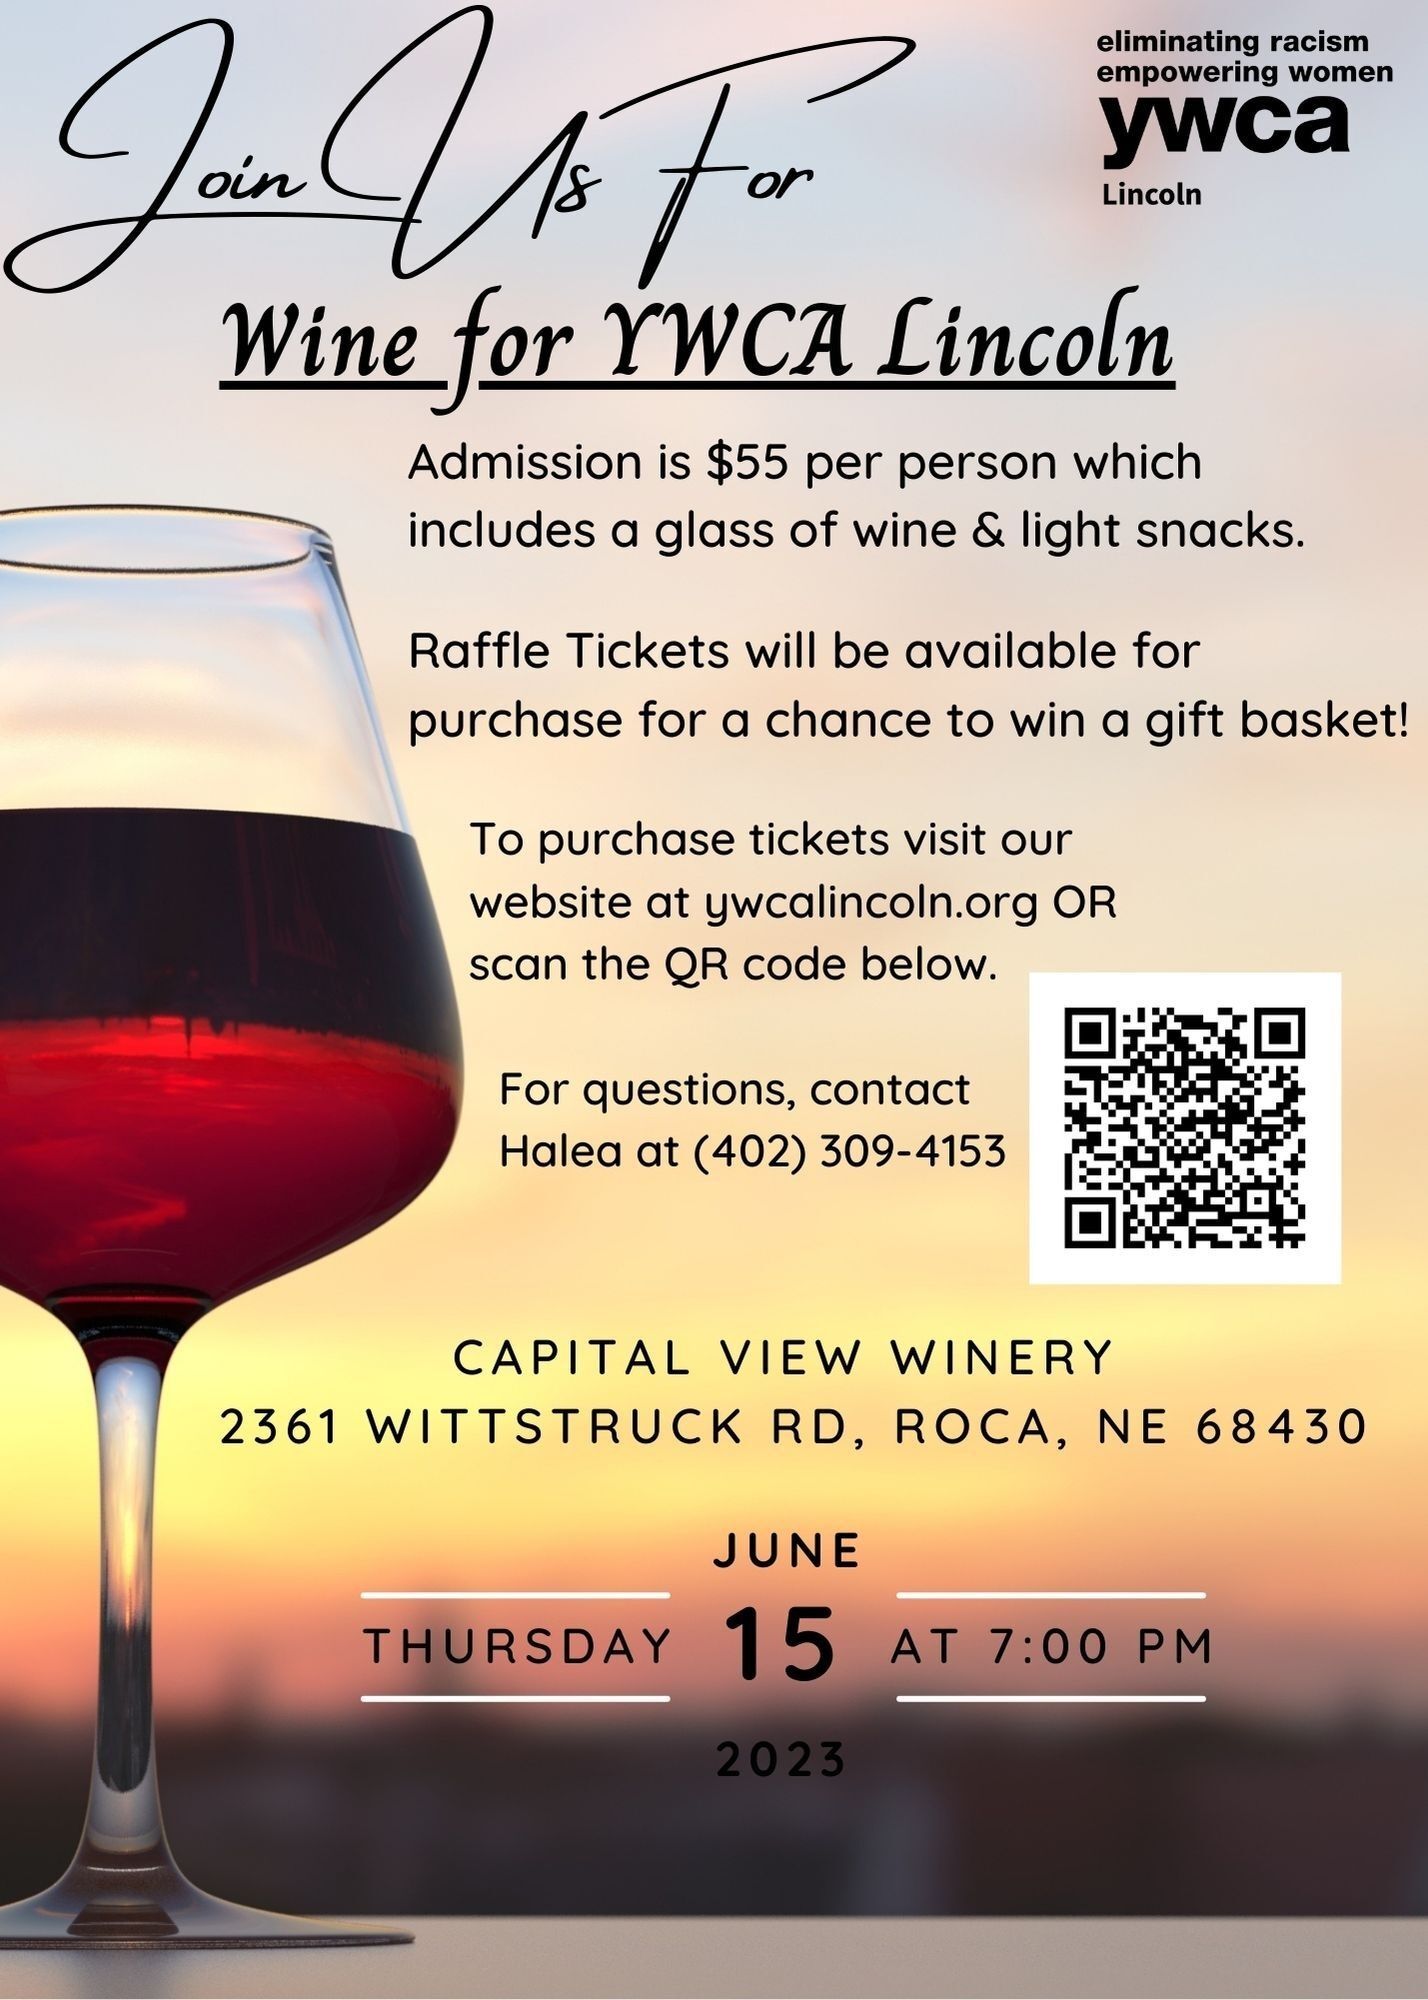 Wine for YWCA Lincoln 